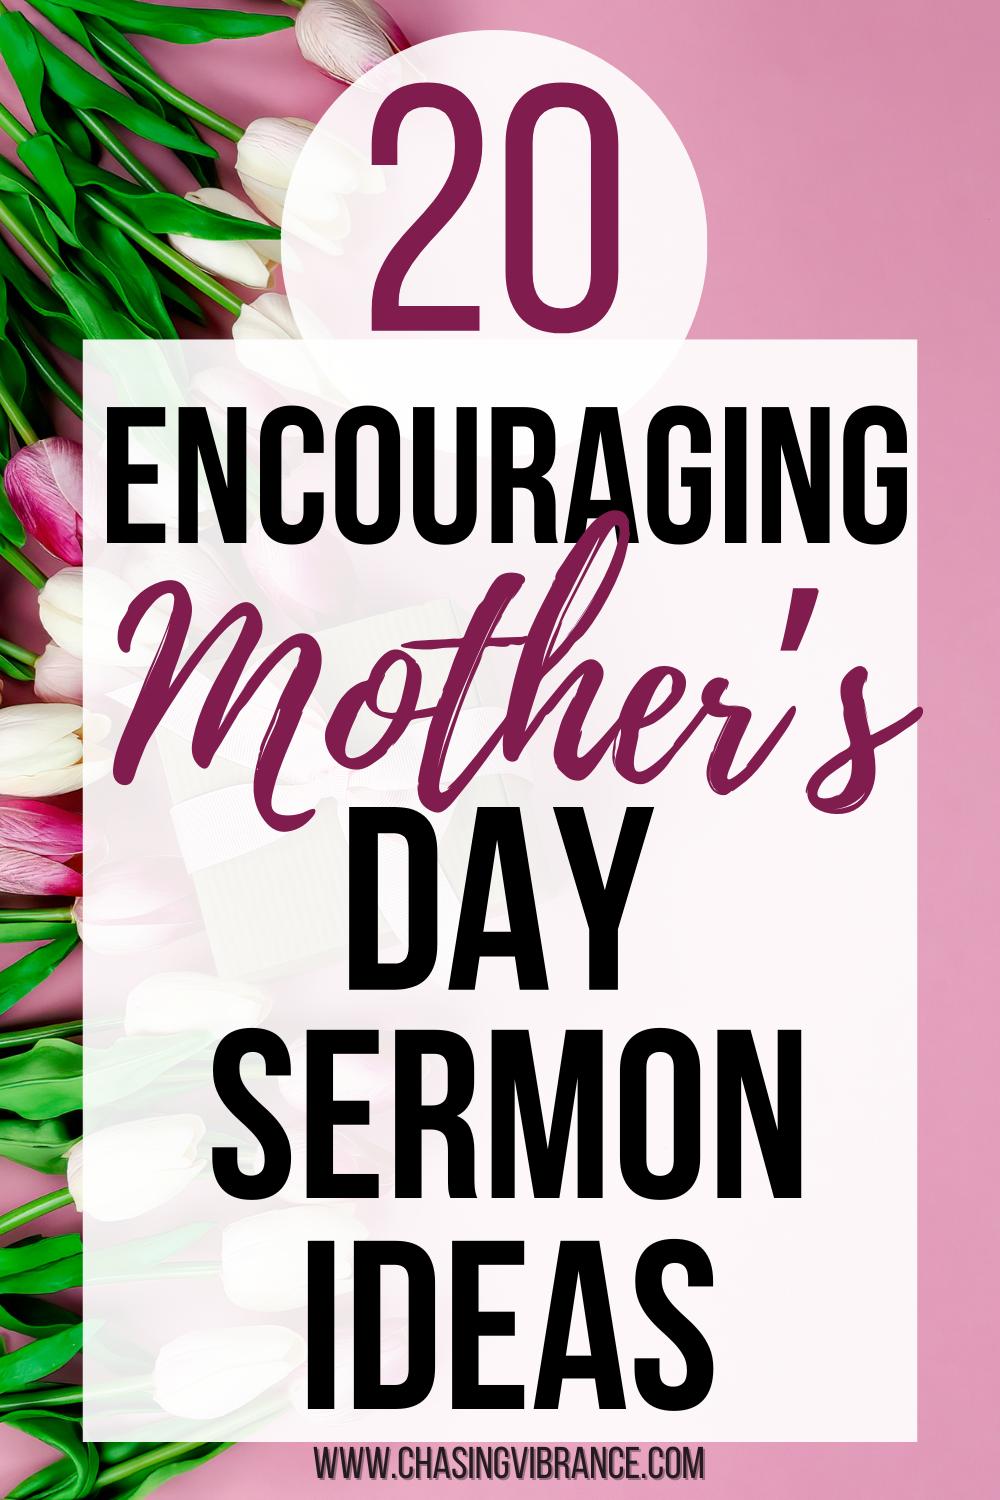 20 Powerful and Engaging Sermon Ideas for Mother’s Day